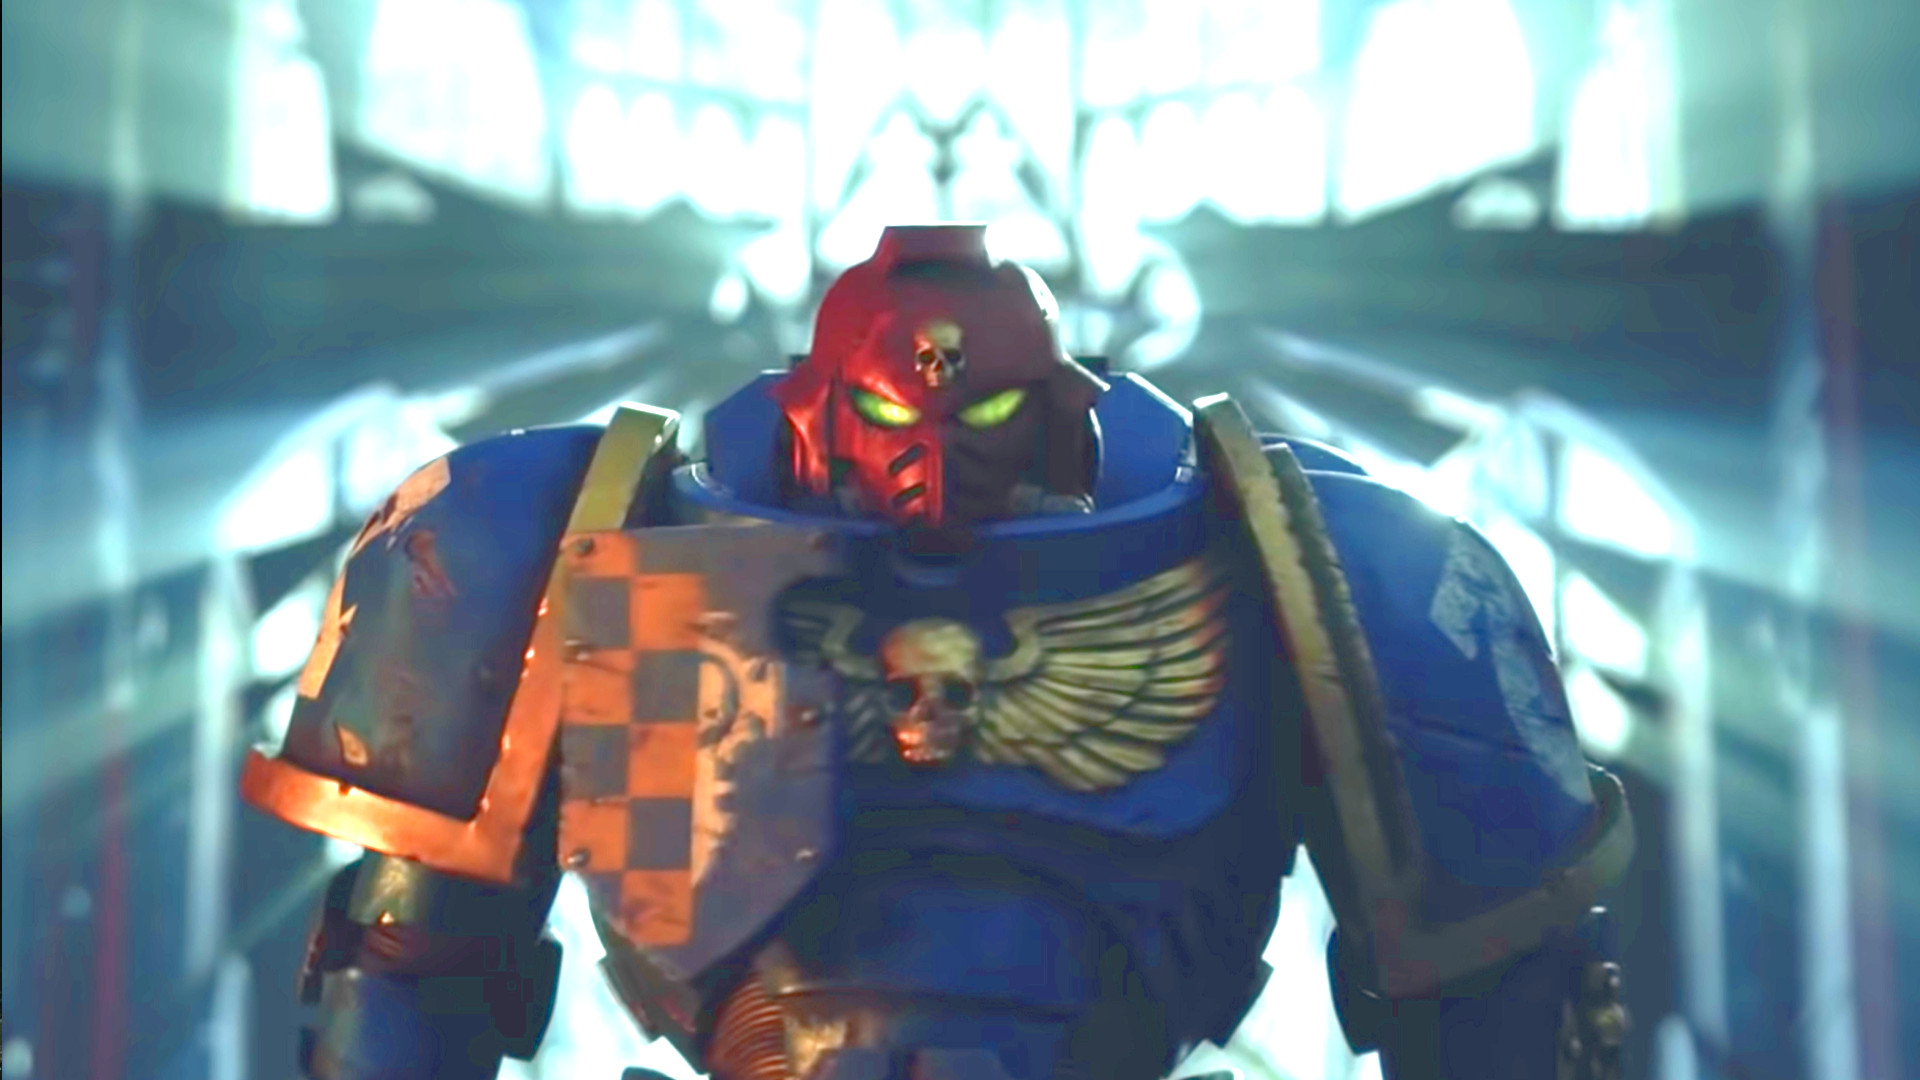 acquires film/TV rights to 'Warhammer 40,000' IP